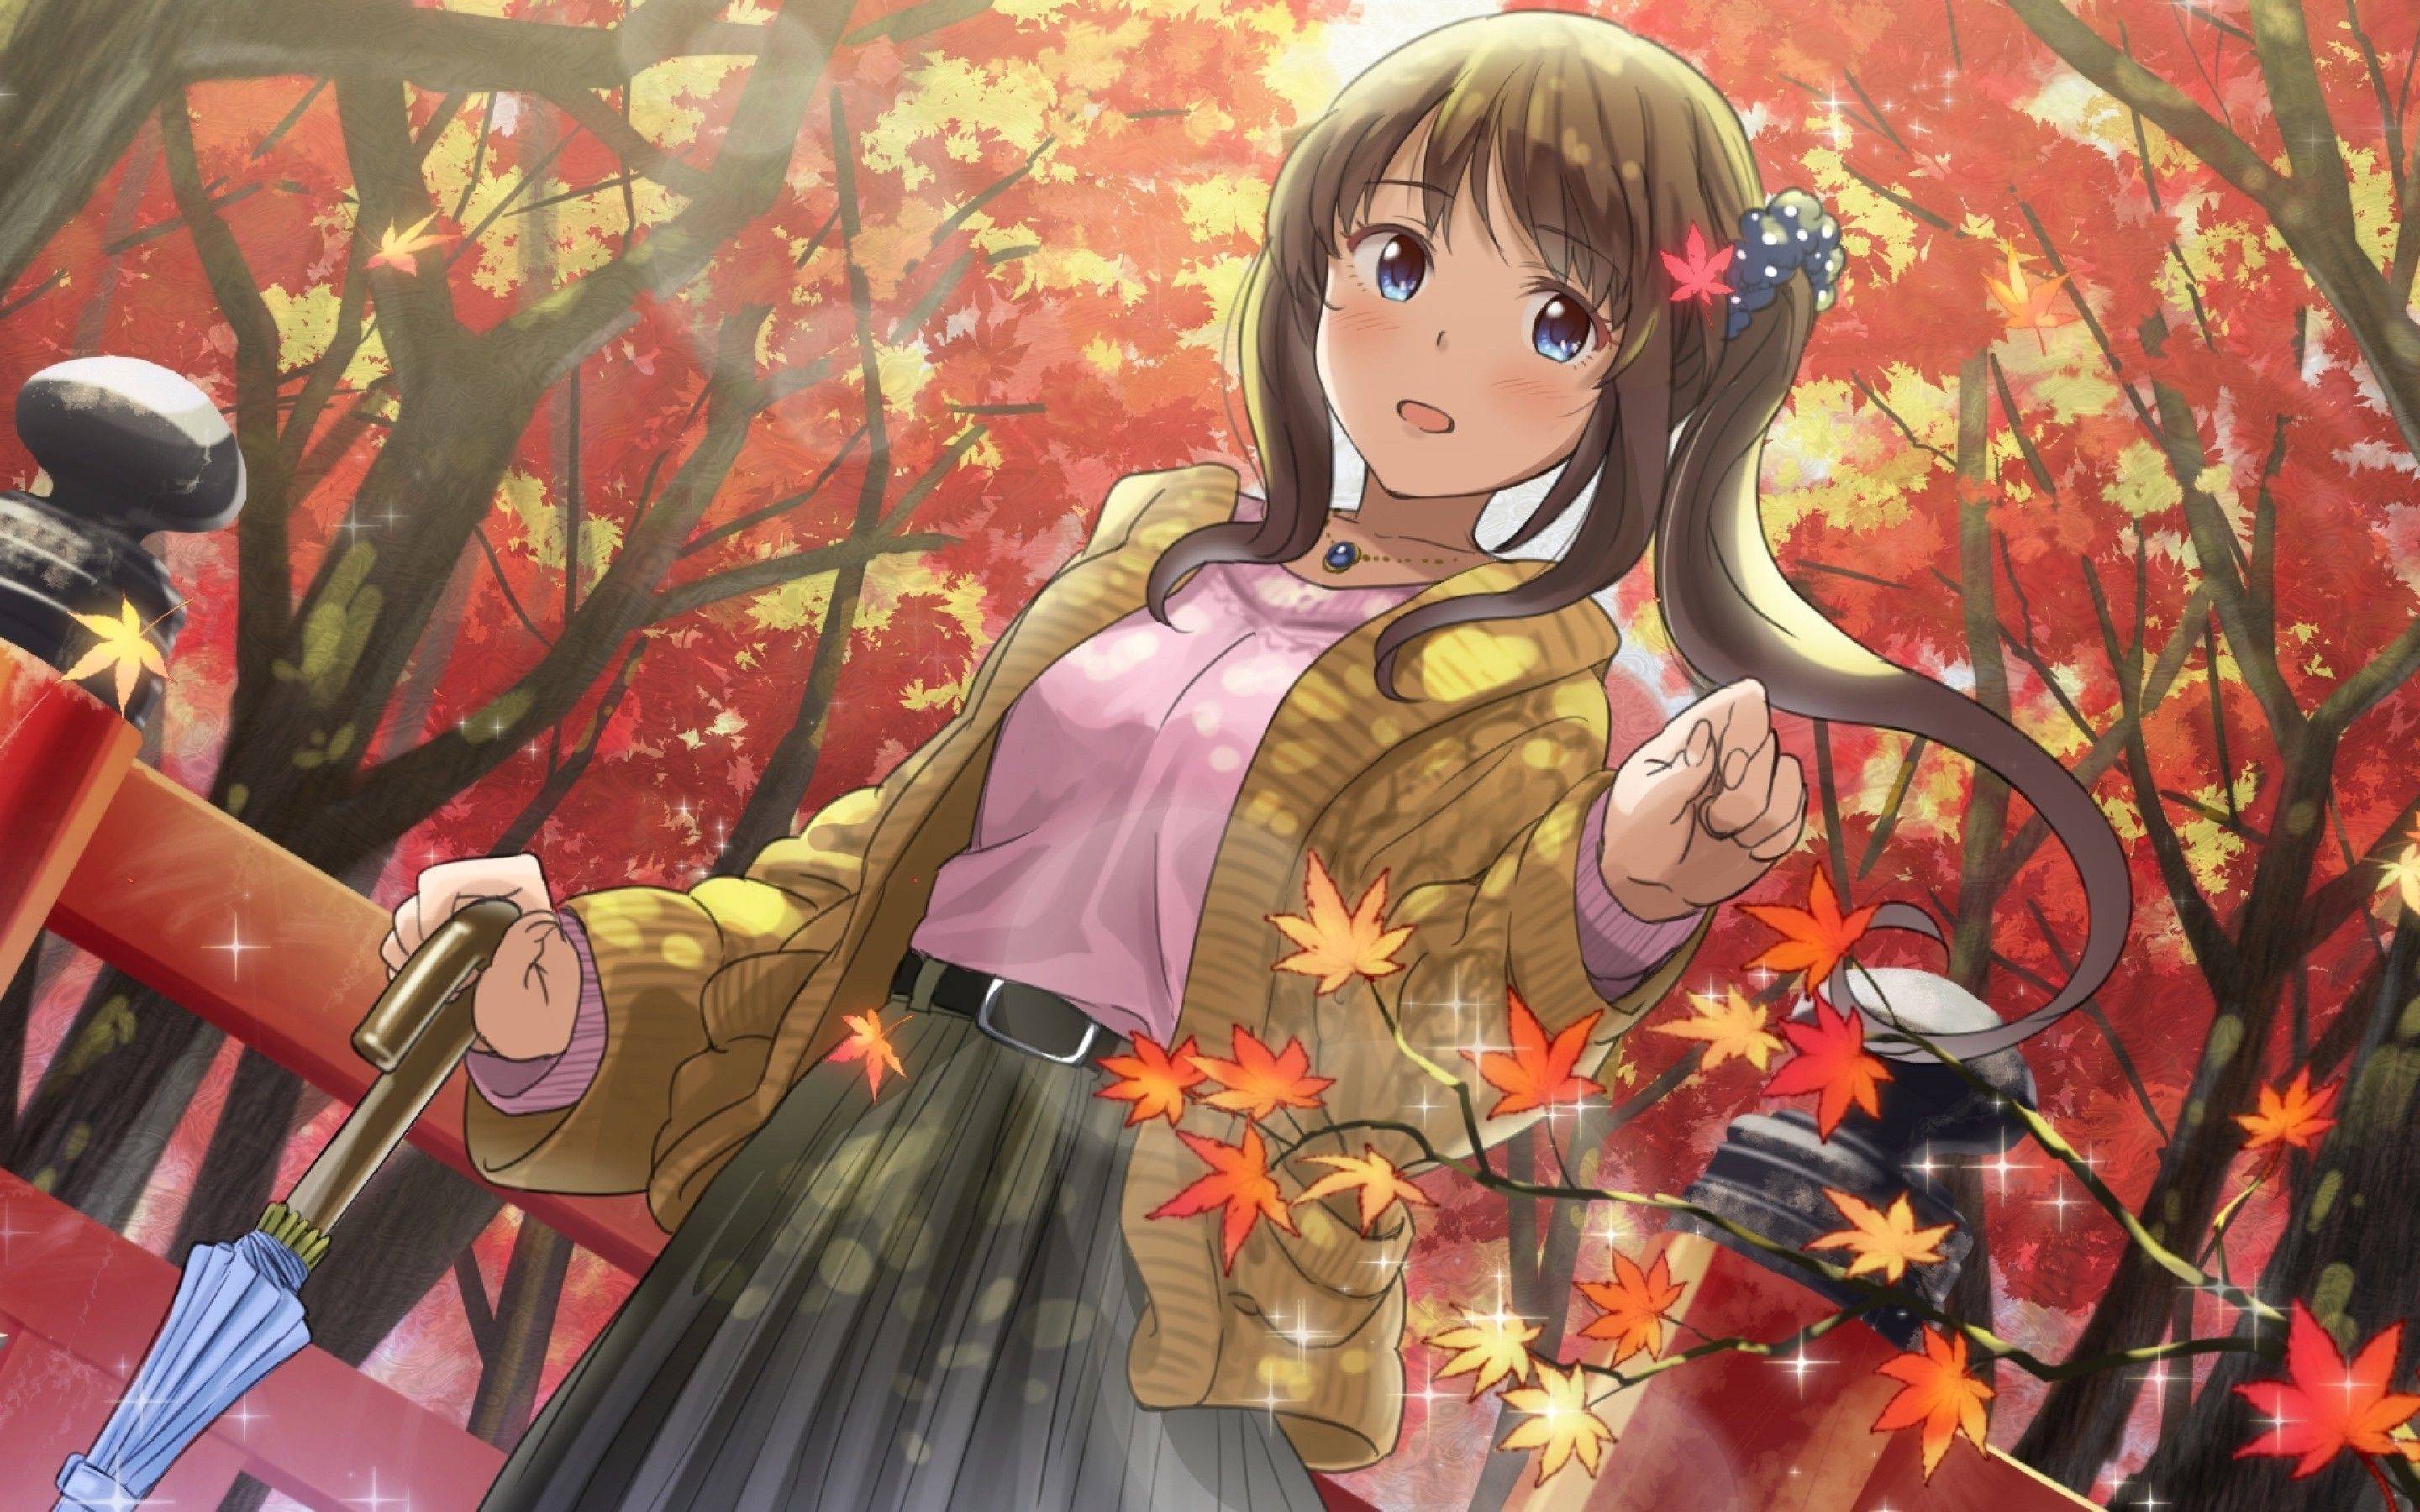 Download 2880x1800 Autumn, Anime Girl, Brown Hair, Umbrella, Trees Wallpaper for MacBook Pro 15 inch